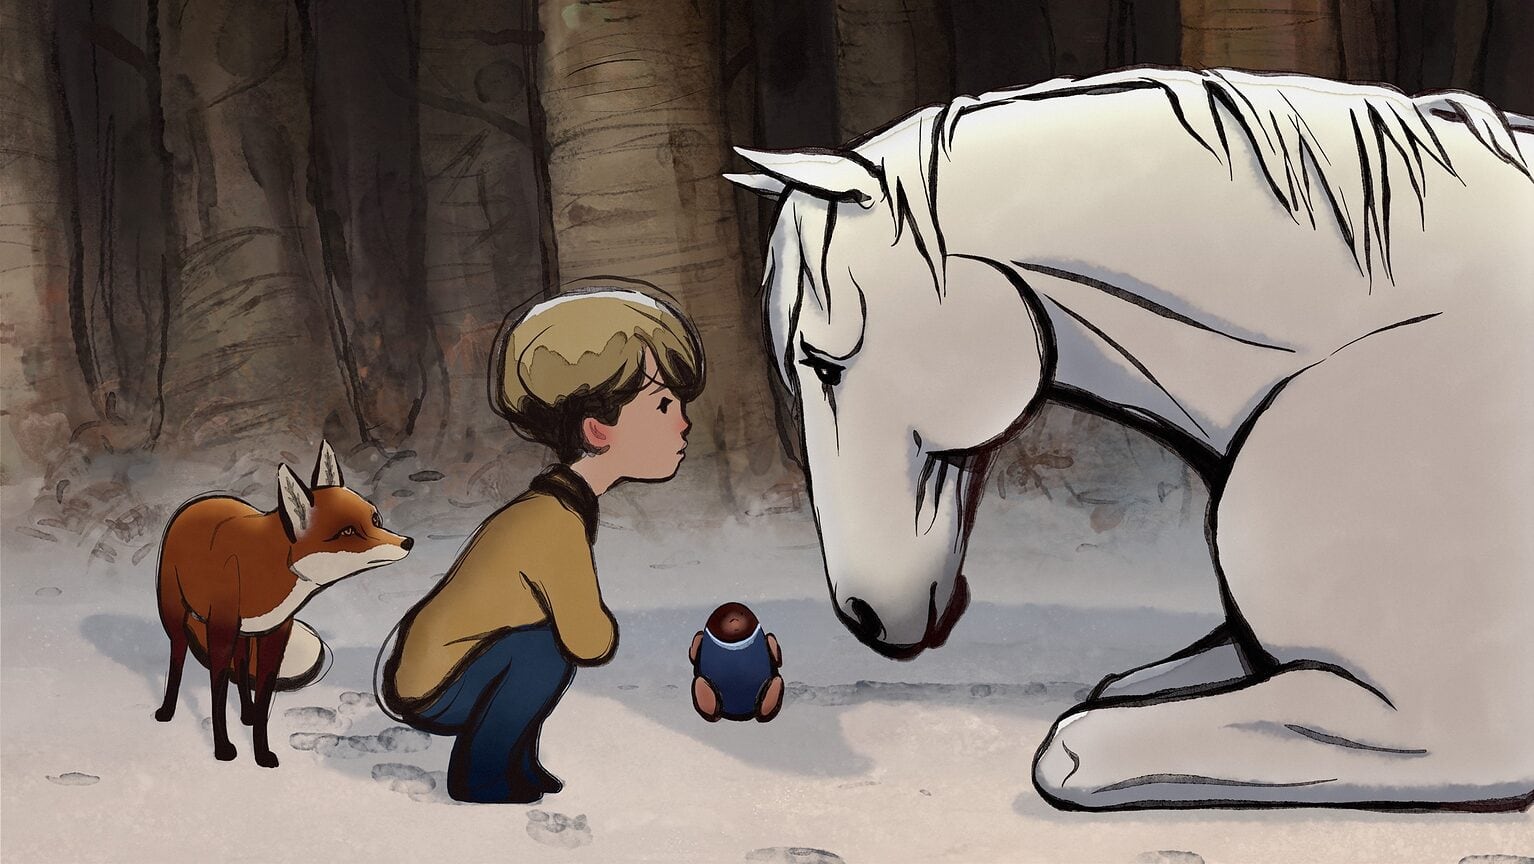 The Boy, the Mole, the Fox and the Horse review on Apple TV+: This animated short film hits all the right notes.